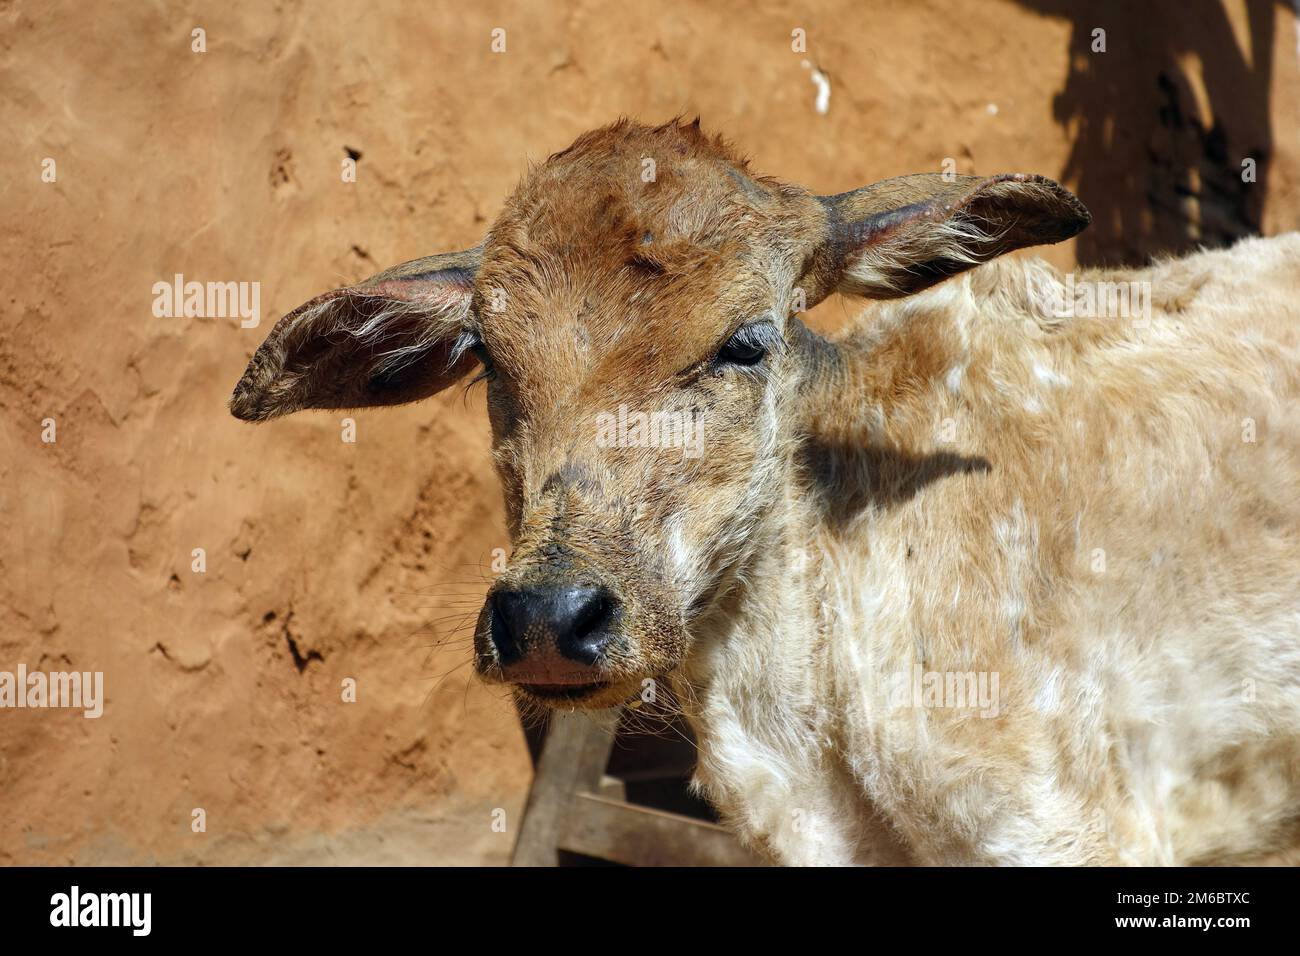 Young cattle standing staring Stock Photo